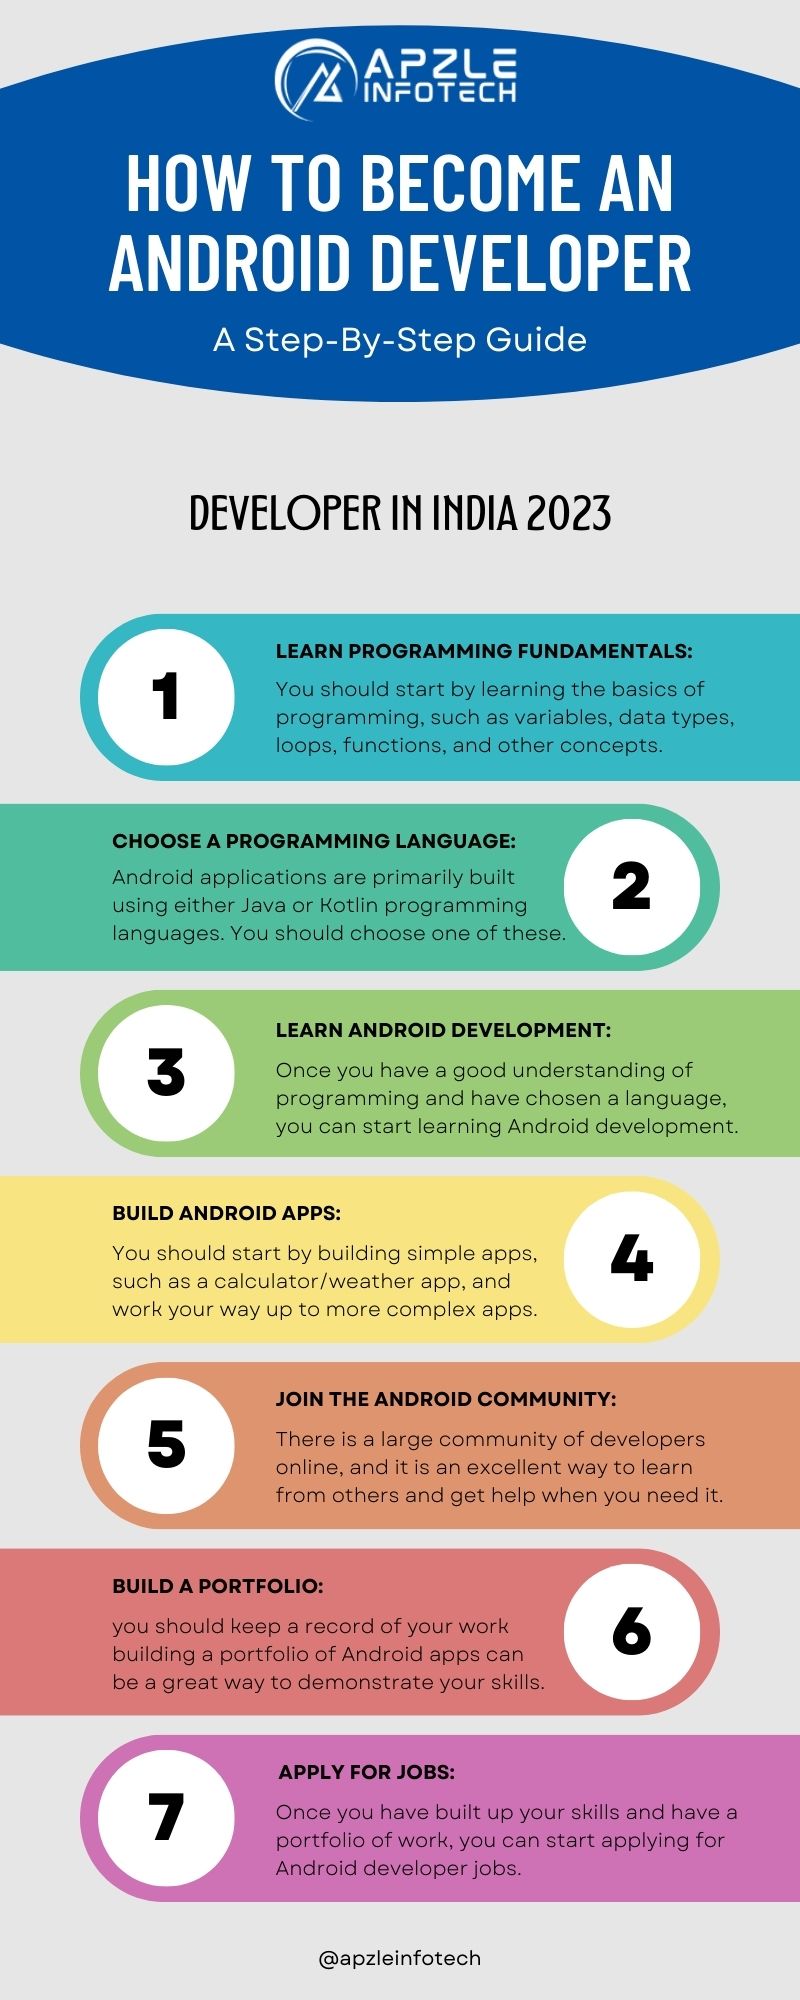 How to Become an Android Developer in india 2023 : A Step-By-Step Guide